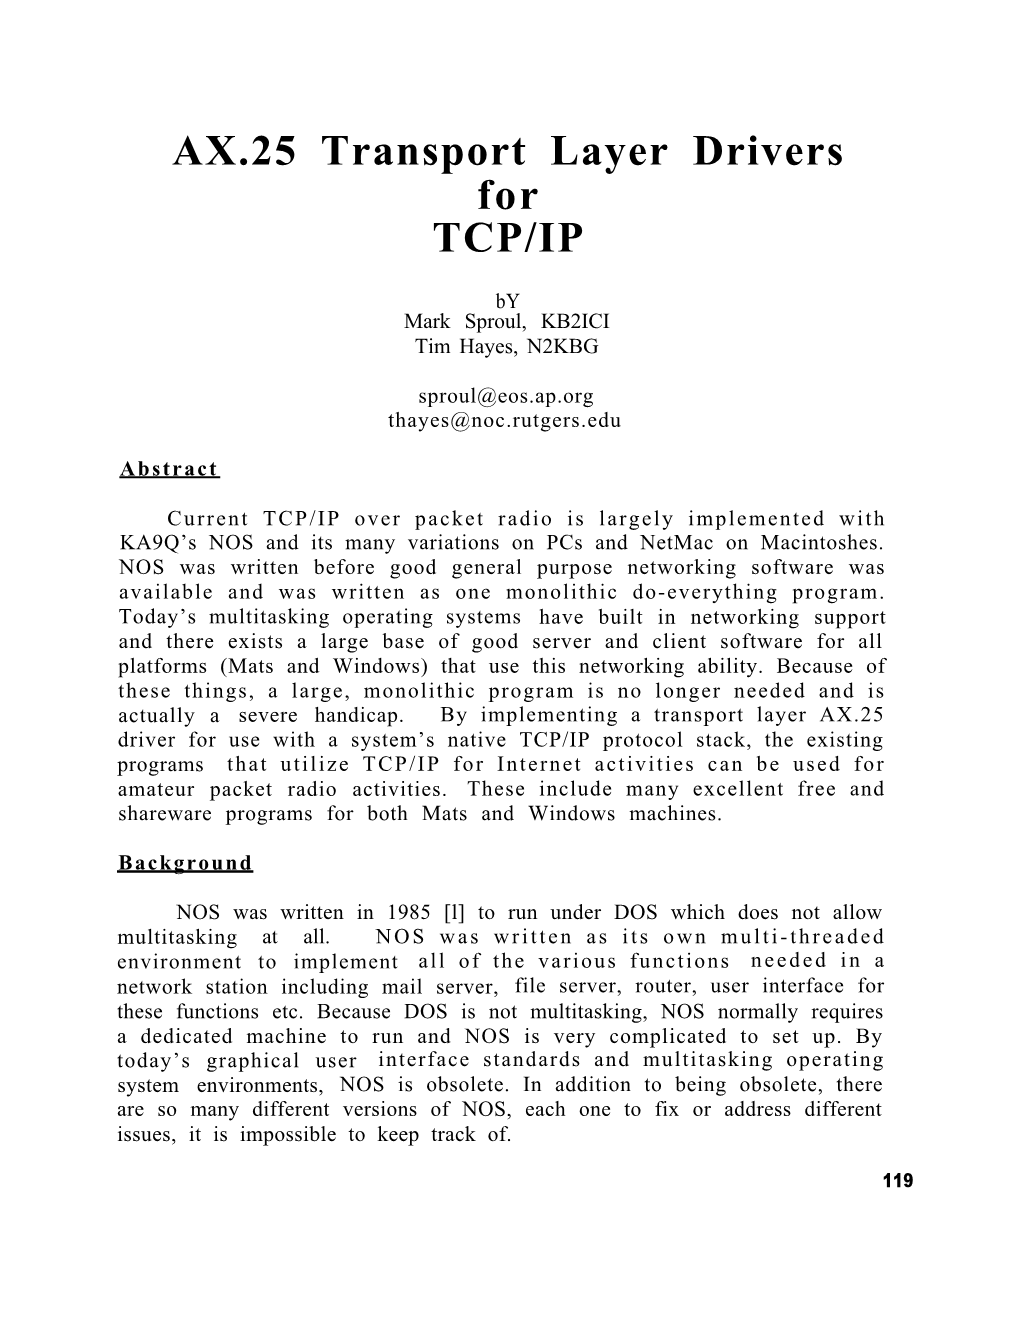 AX.25 Transport Layer Drivers for TCP/IP